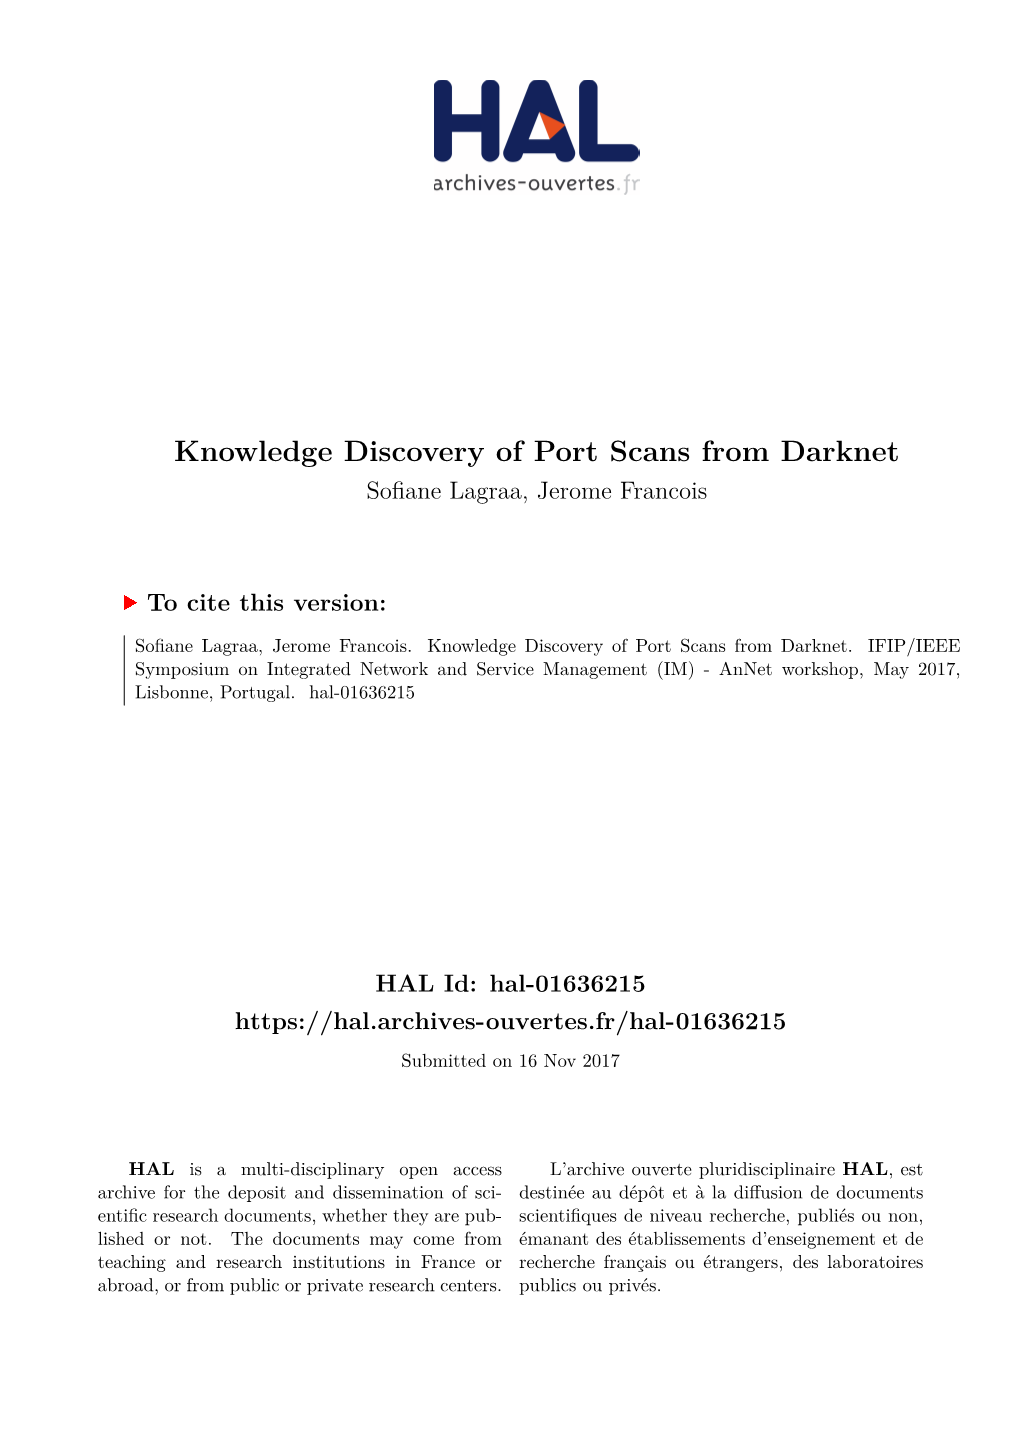 Knowledge Discovery of Port Scans from Darknet Sofiane Lagraa, Jerome Francois